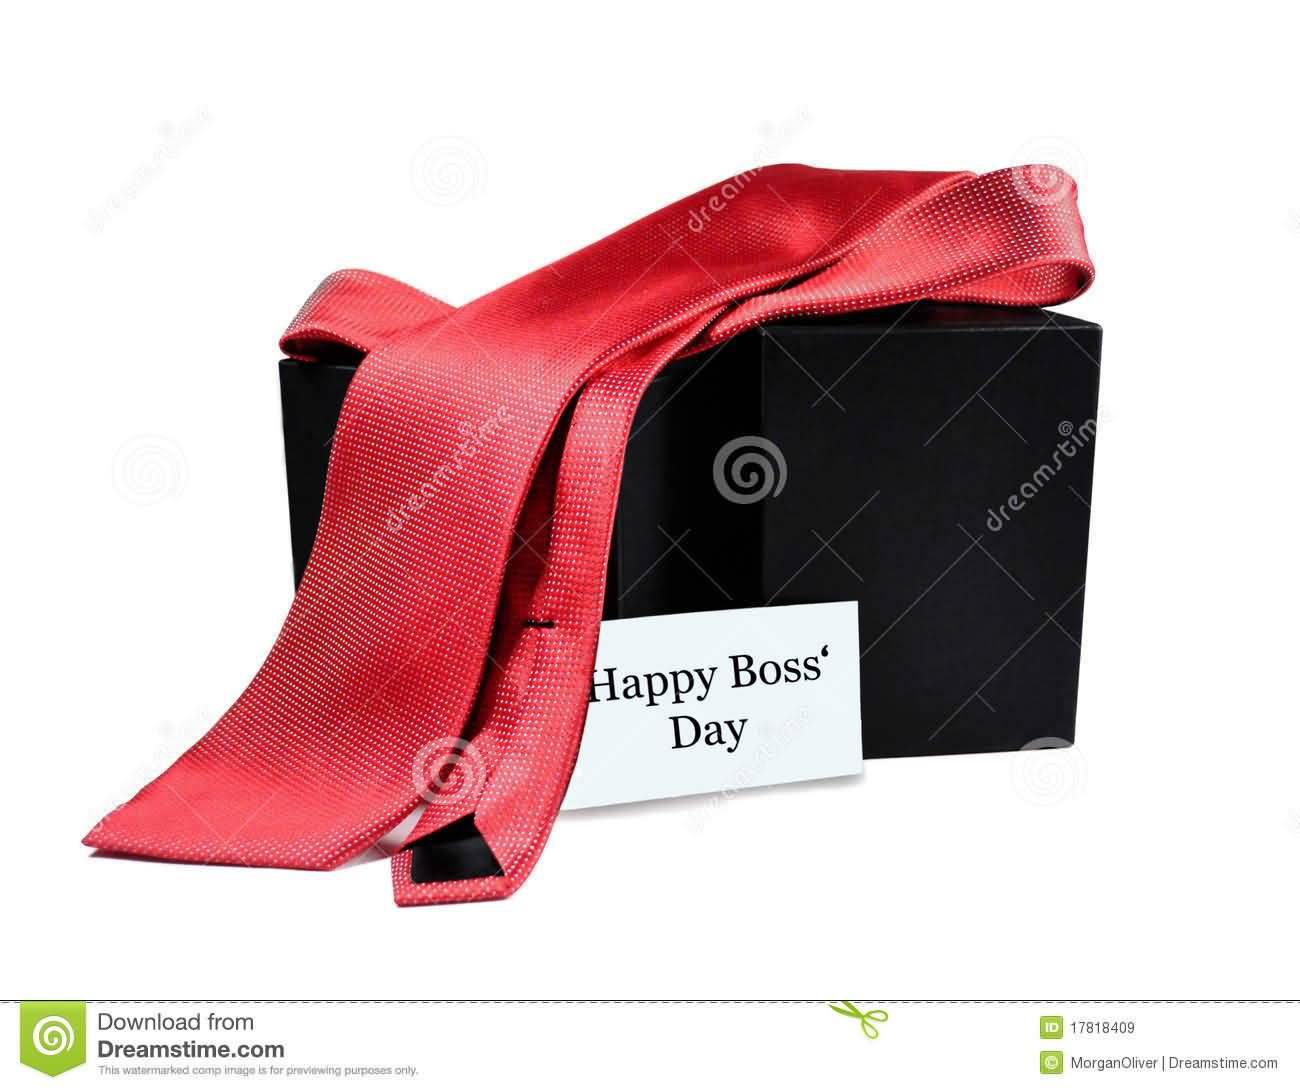 Happy Boss's Day 2016 Tie As Gift Picture